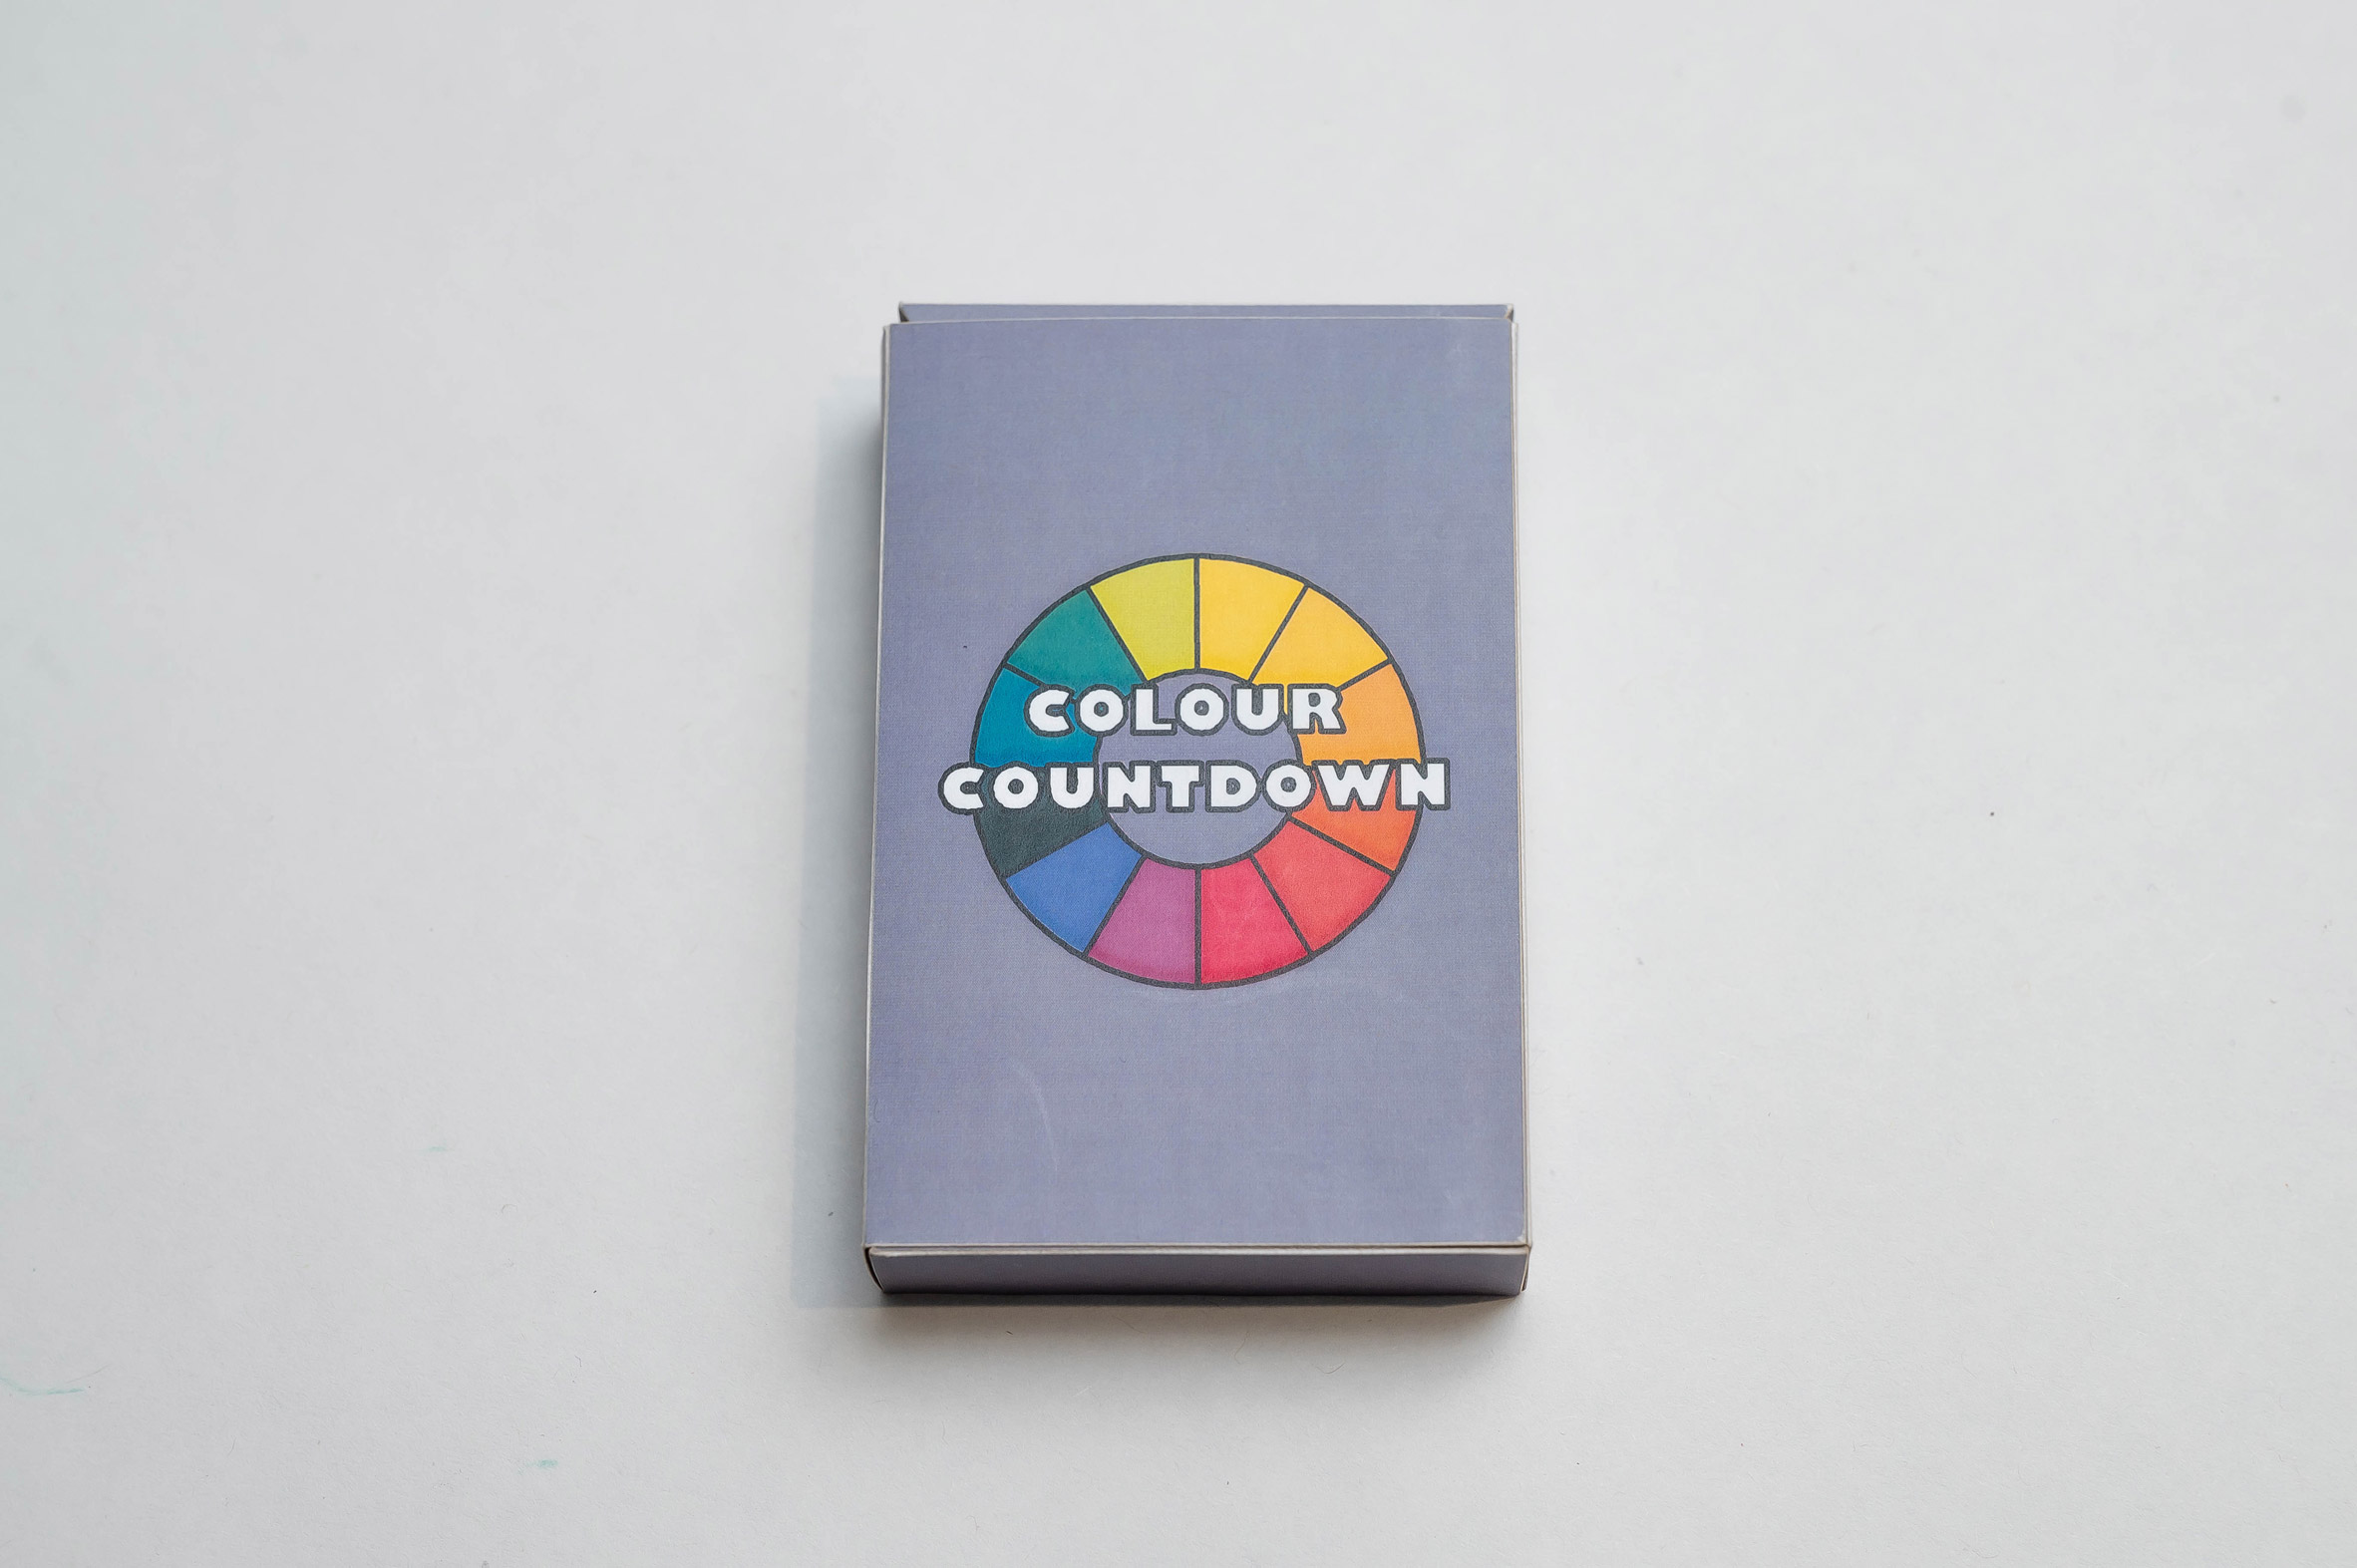 Colour Countdown card game by The Piggott School from 2024 Design Ventura competition 